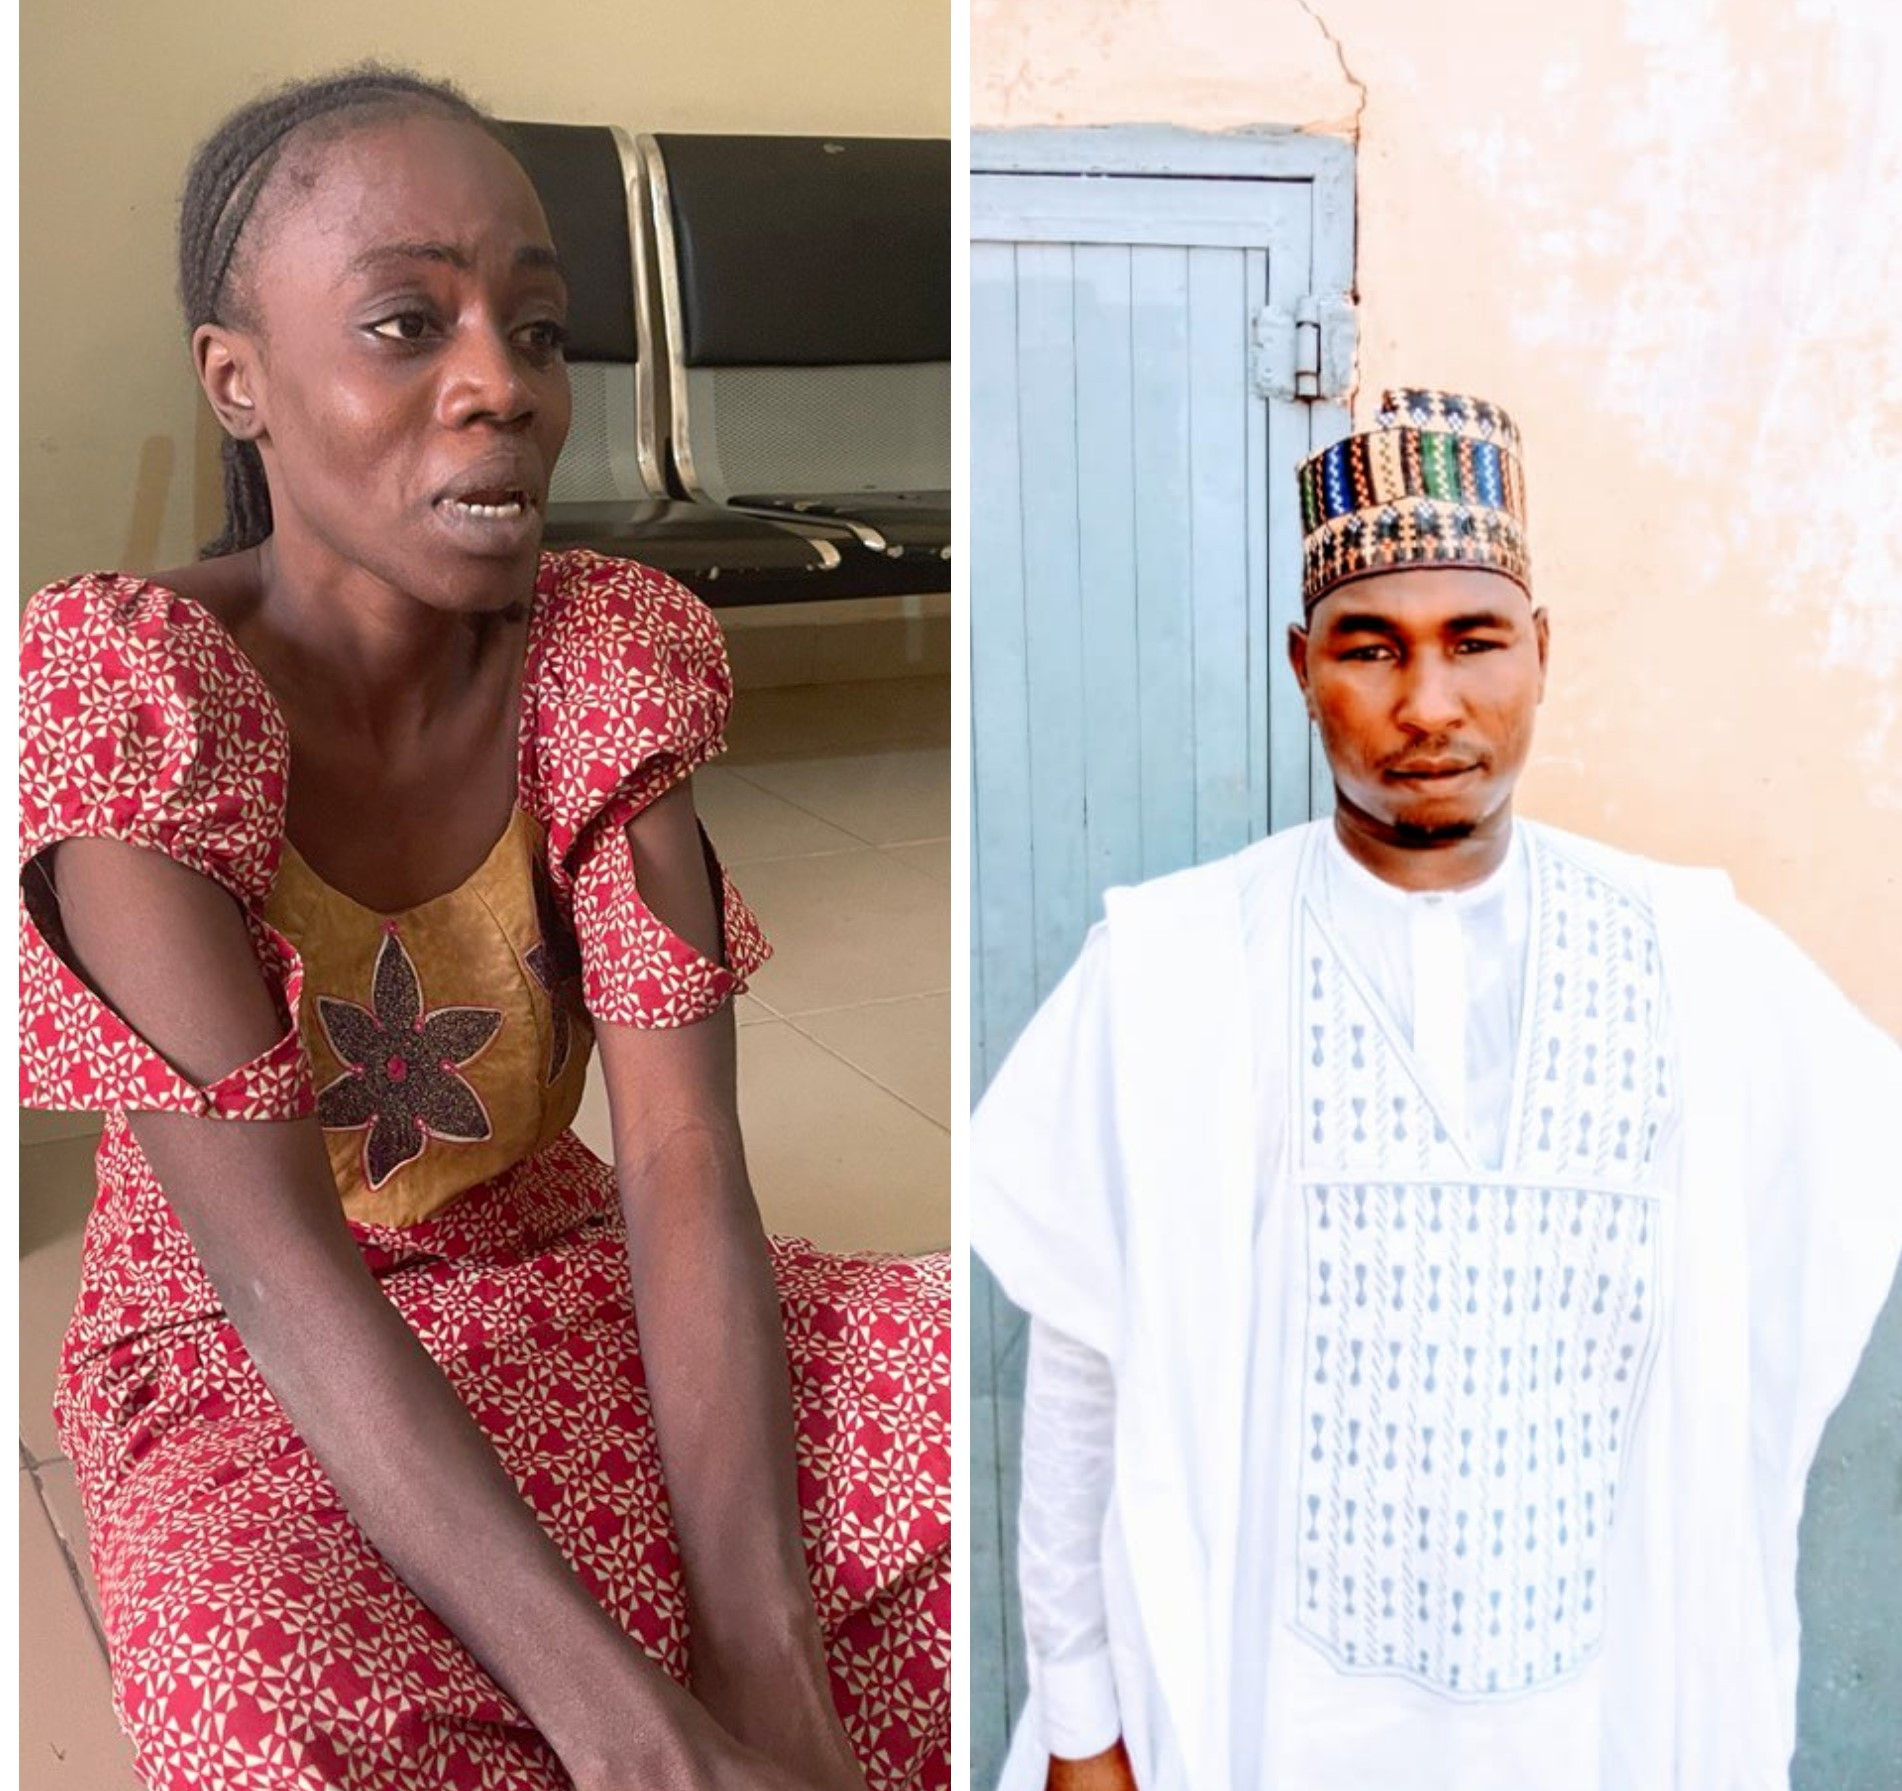 I Hate When Man Comes Near Me, Housewife Says As She Poisons Husband To Death